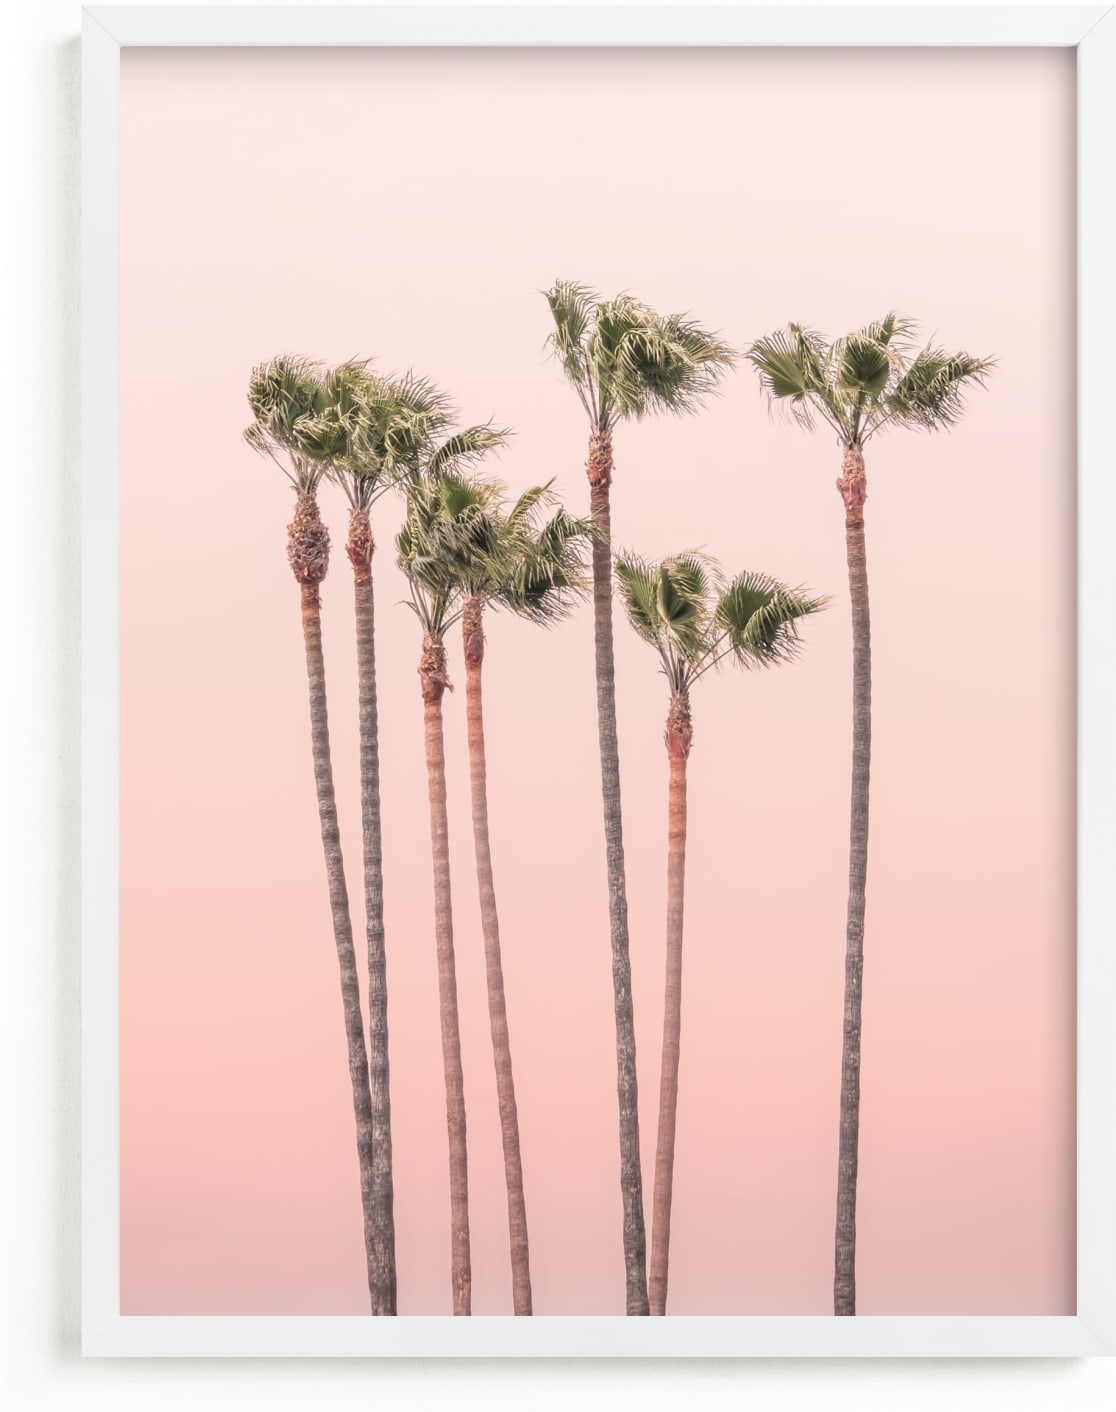 This is a pink art by Lisa Sundin called Seven Palmtrees.